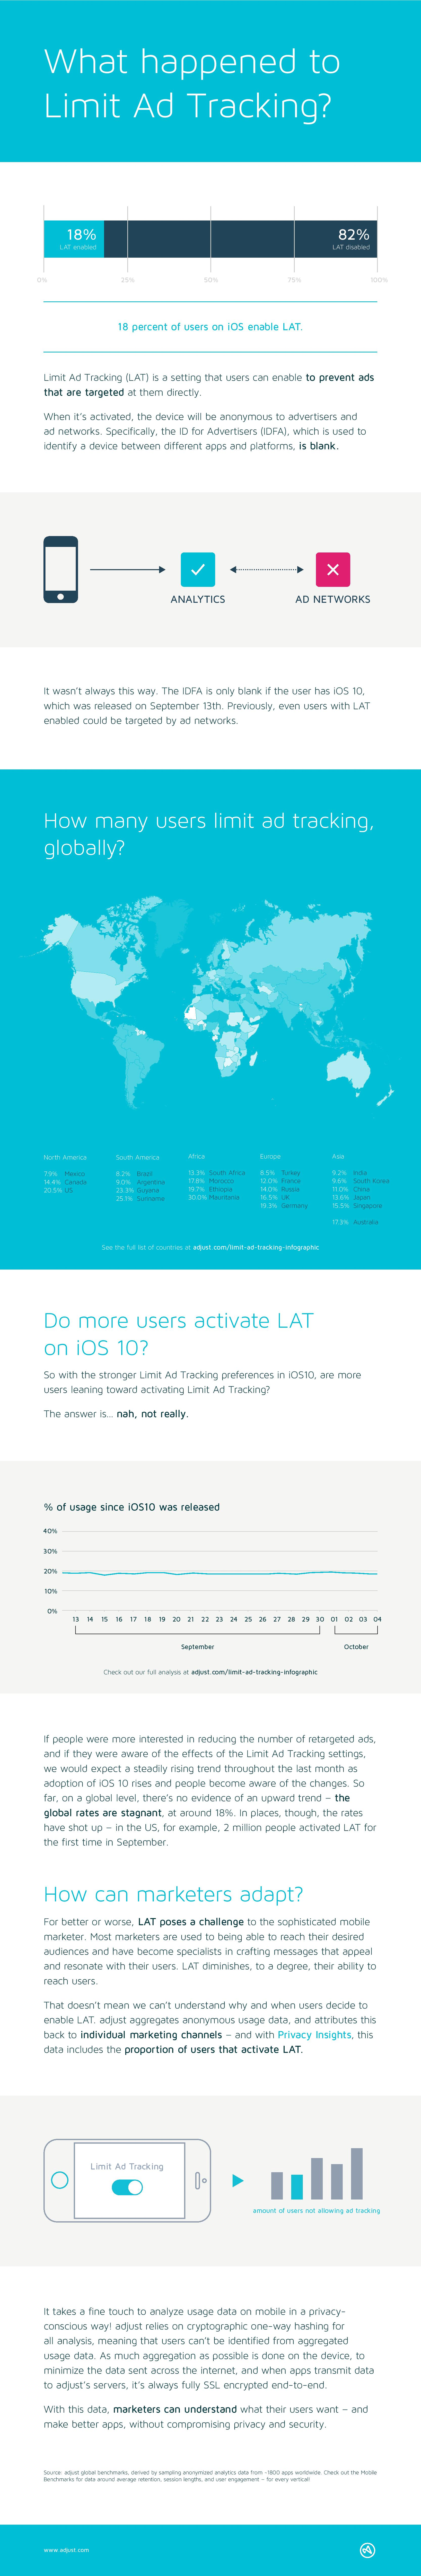 Infographic: 20 per cent of iOS 10 Users Opting Out of Ad Tracking